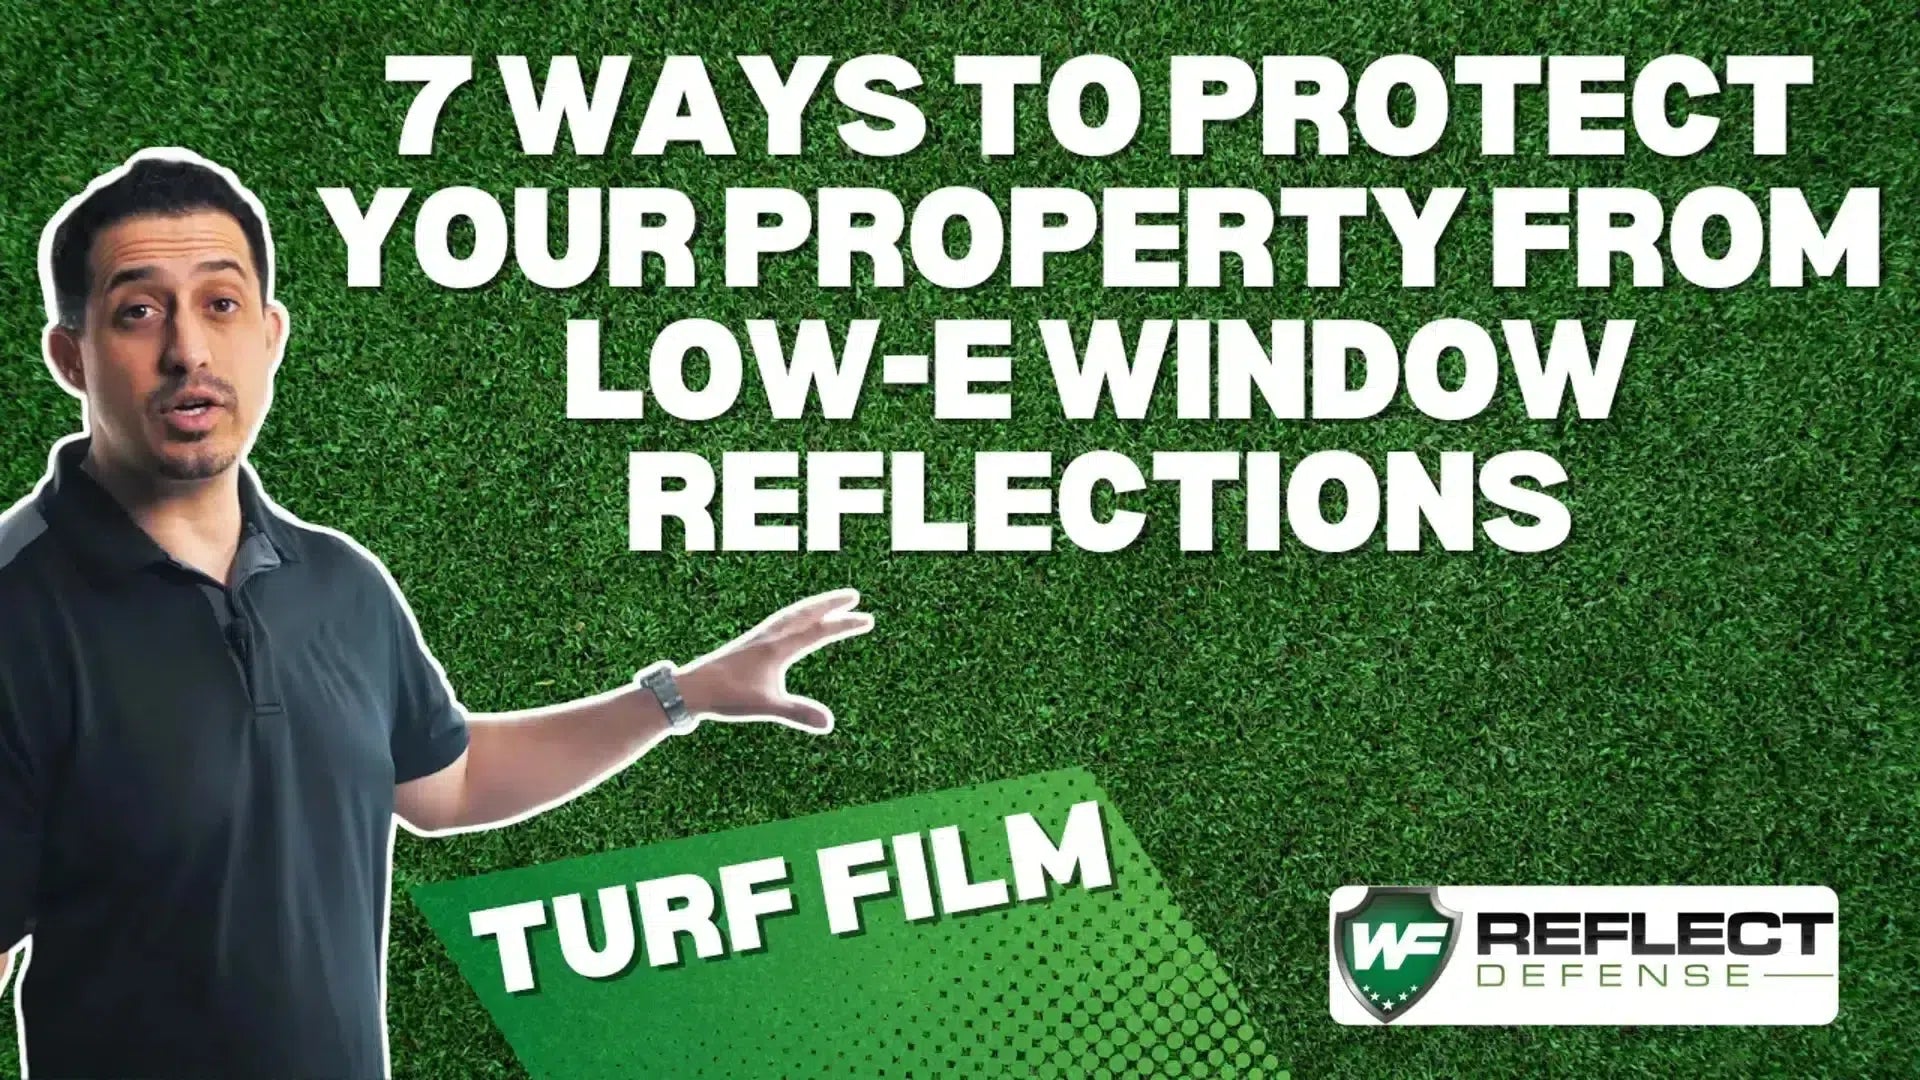 7 ways to protect your property from low e window reflections man pointing with words turf film 